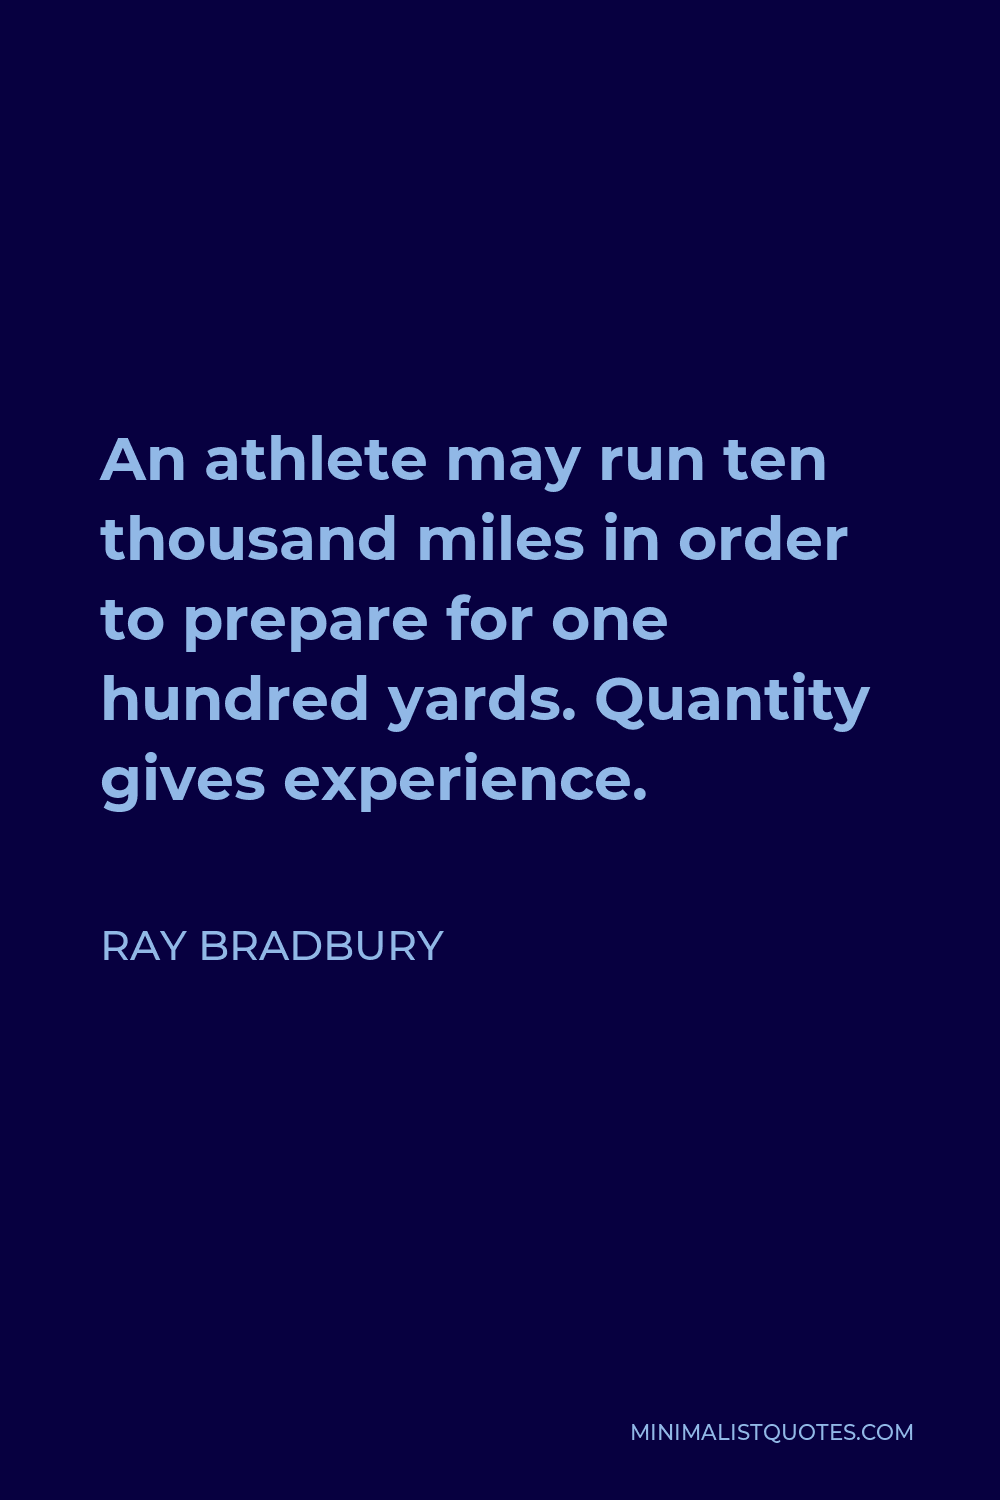 Ray Bradbury Quote - An athlete may run ten thousand miles in order to prepare for one hundred yards. Quantity gives experience.